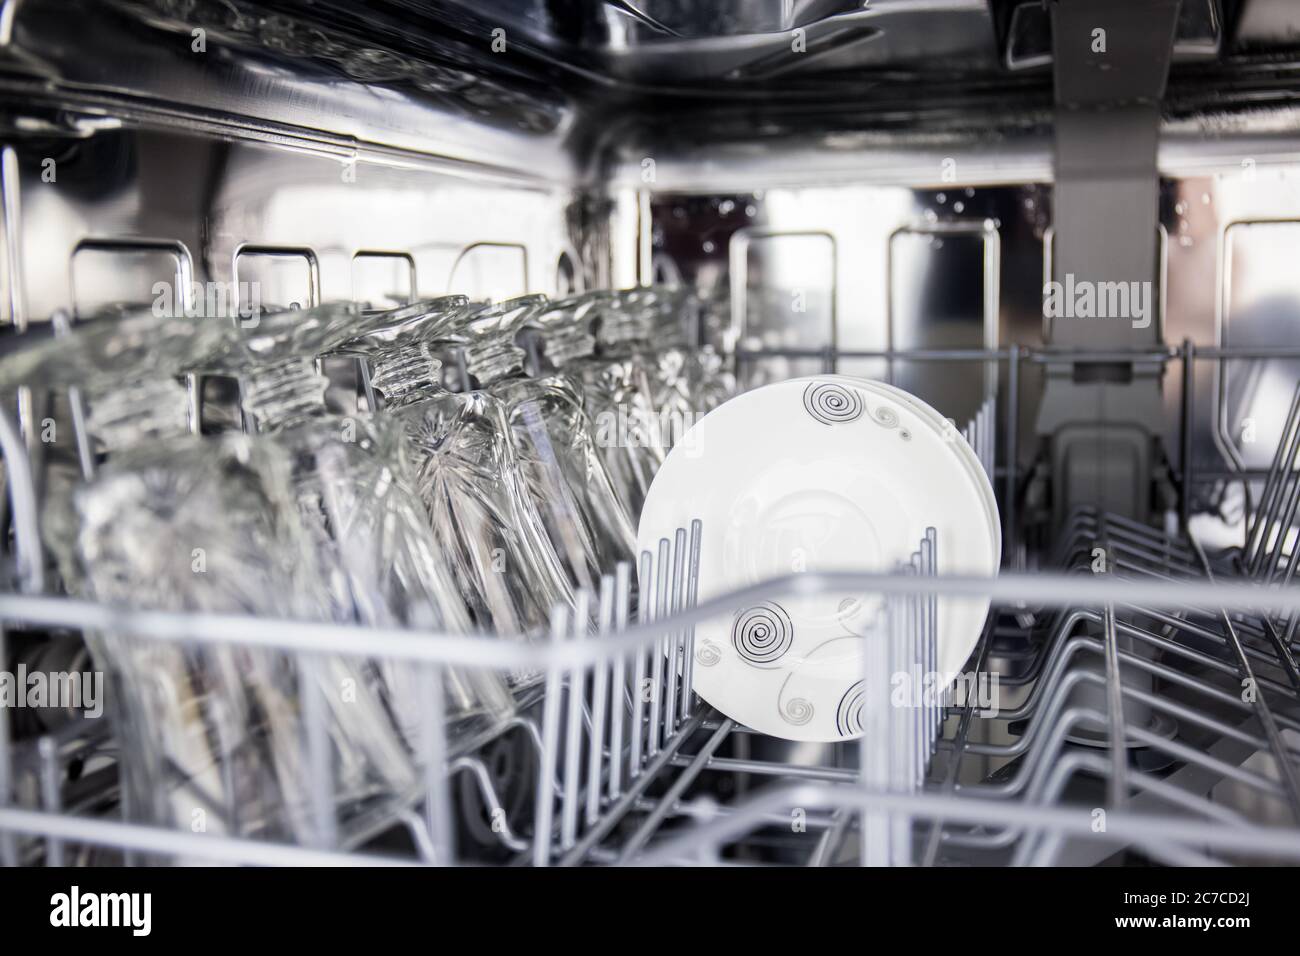 using dishwasher to save time in cleaning plates and glassware and  routinely clean dirty dishes for hygiene with technology to remove stains  Stock Photo - Alamy